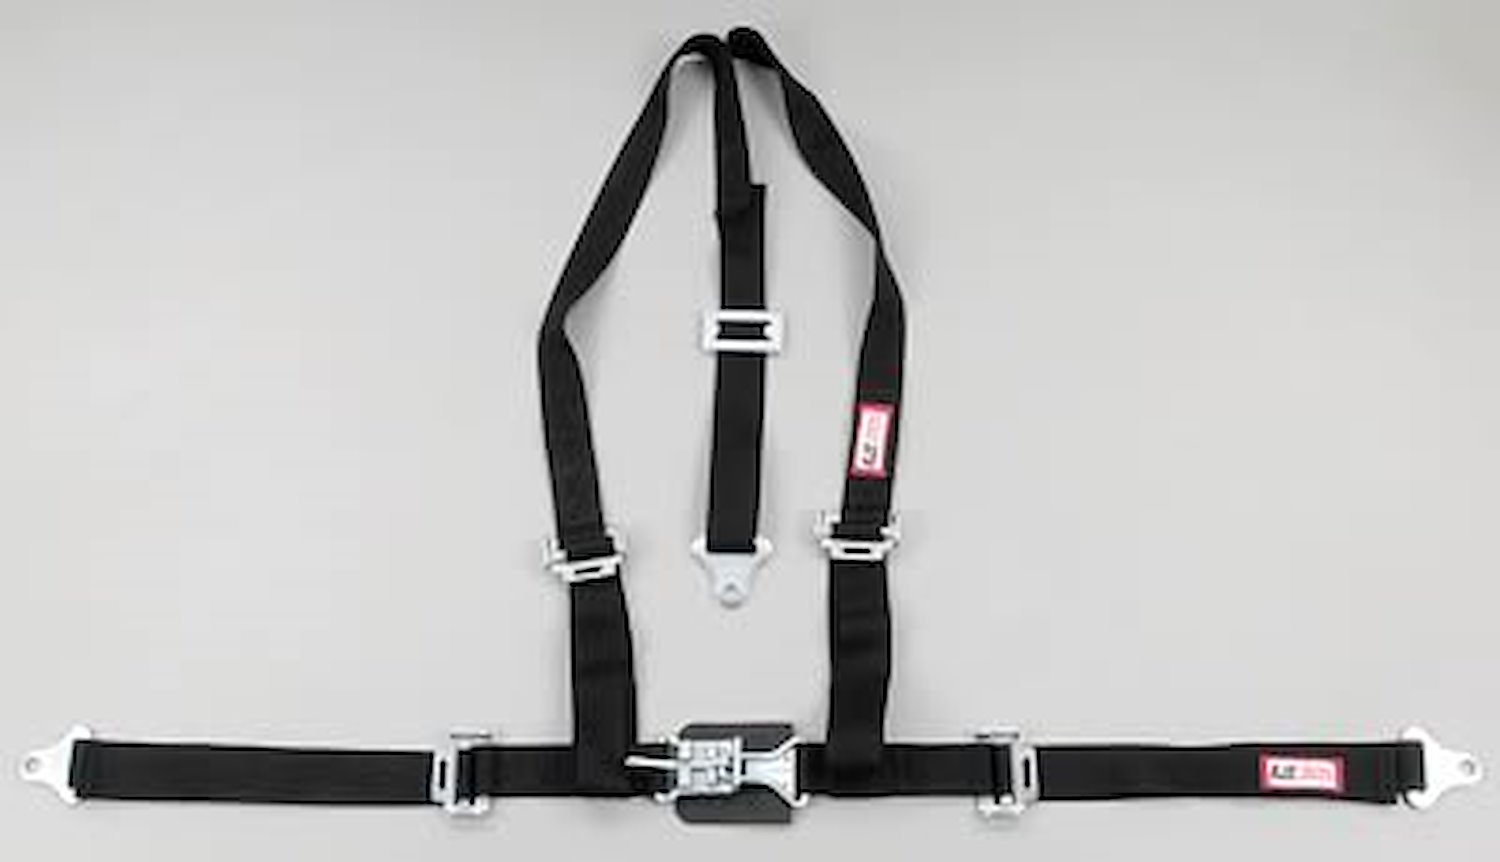 NON-SFI L&L HARNESS 3 PULL UP Lap Belt SEWN IN 2 S.H. Individual FLOOR Mount w/STERNUM STRAP ALL WRAP ENDS PURPLE